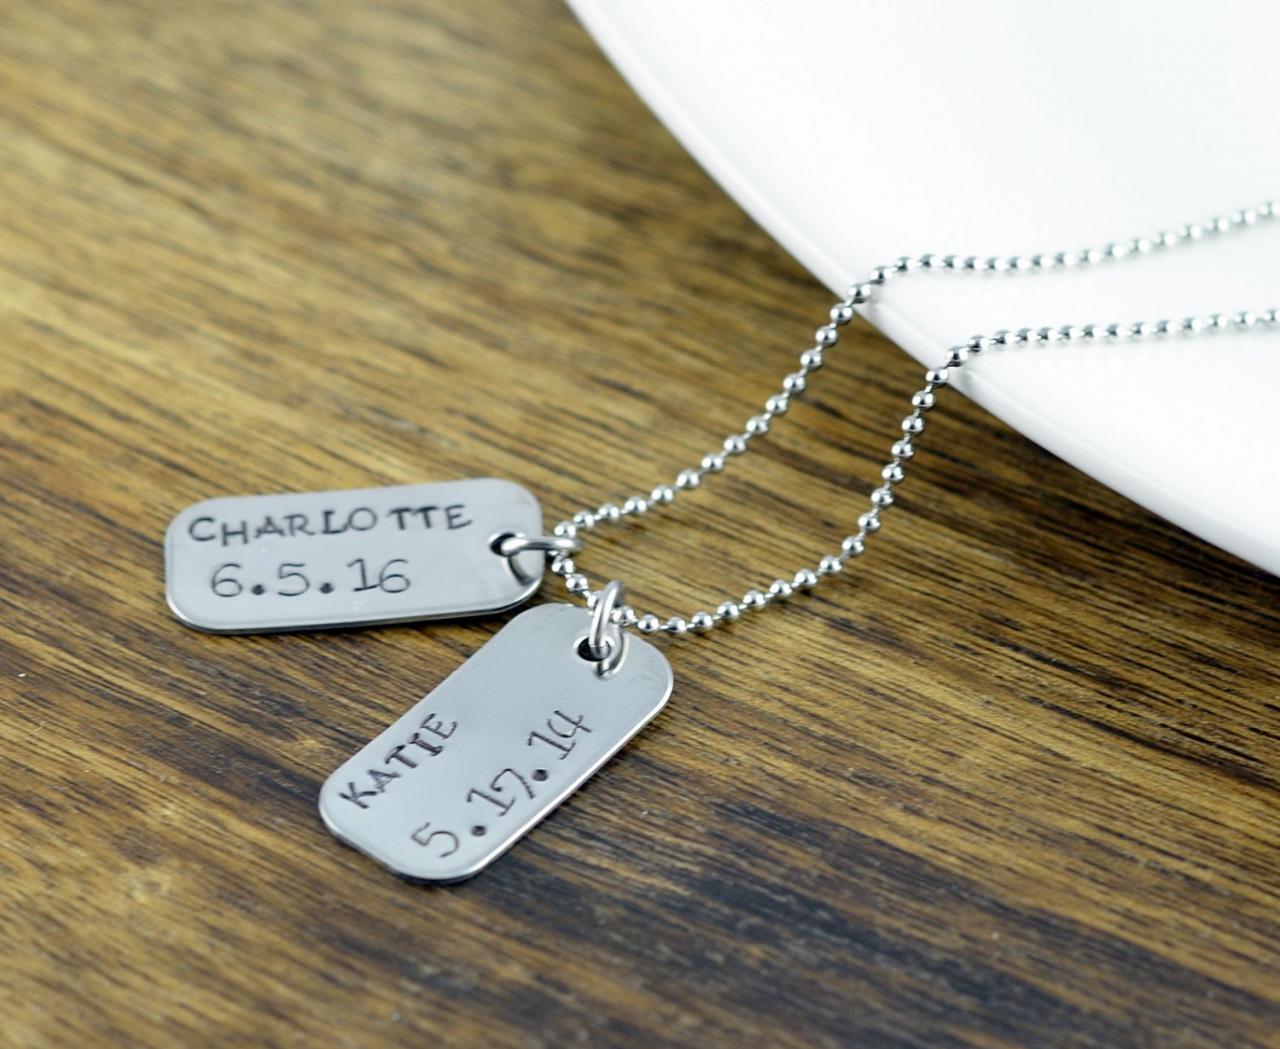 Personalized Mens Necklace, Dog Tag Necklace, Mens Jewelry, Mens Gift, Hand Stamped Necklace, Gift For Him, Gift For Dad, Christmas Gift